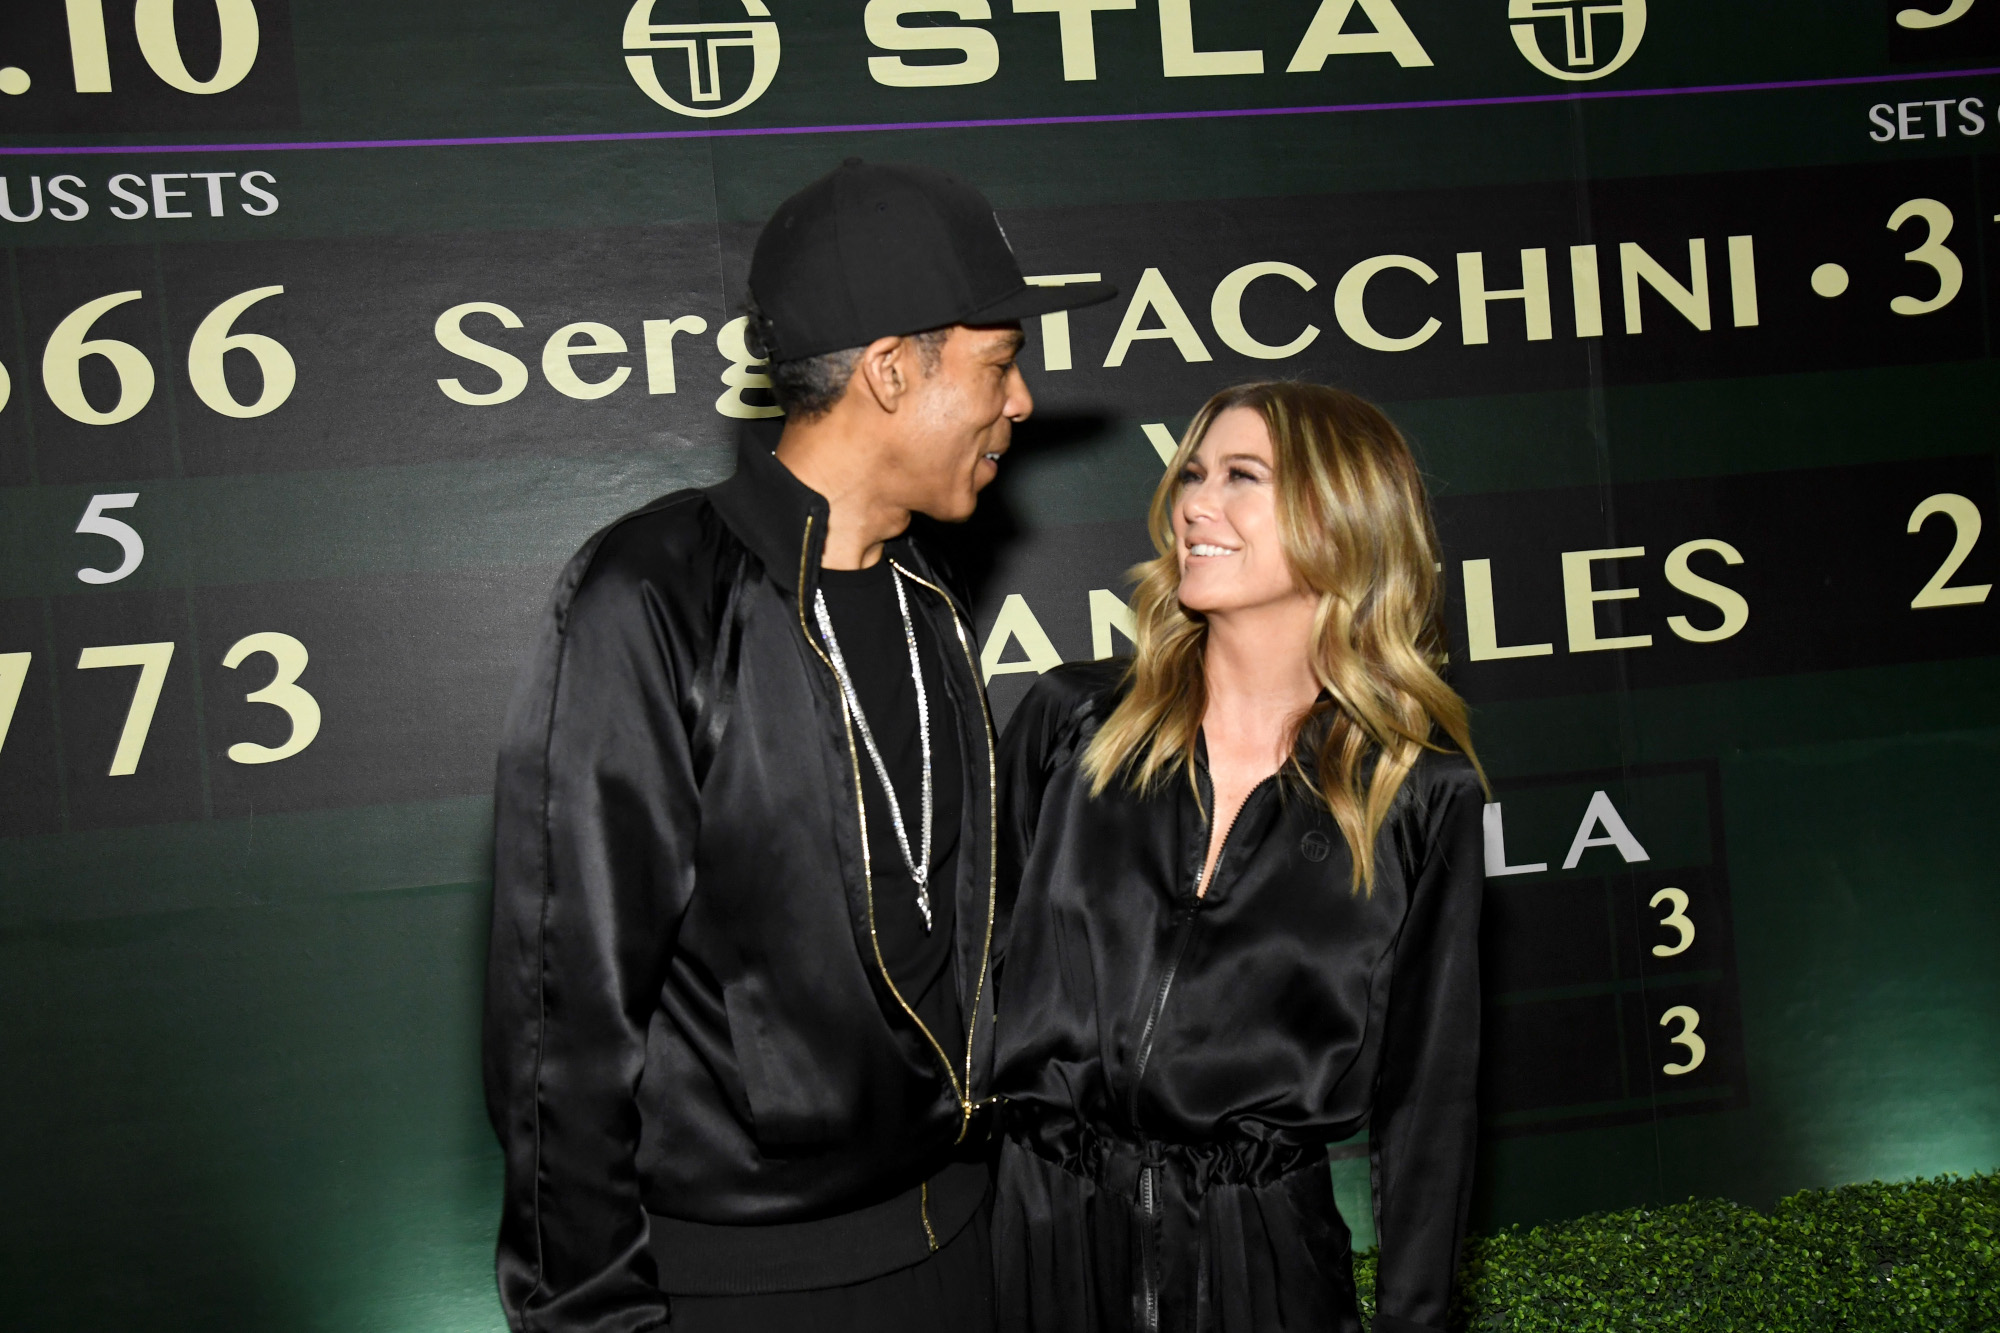 Ellen Pompeo with husband Chris Ivery. Both are wearing black formalwear and smiling while looking into each other's eyes.